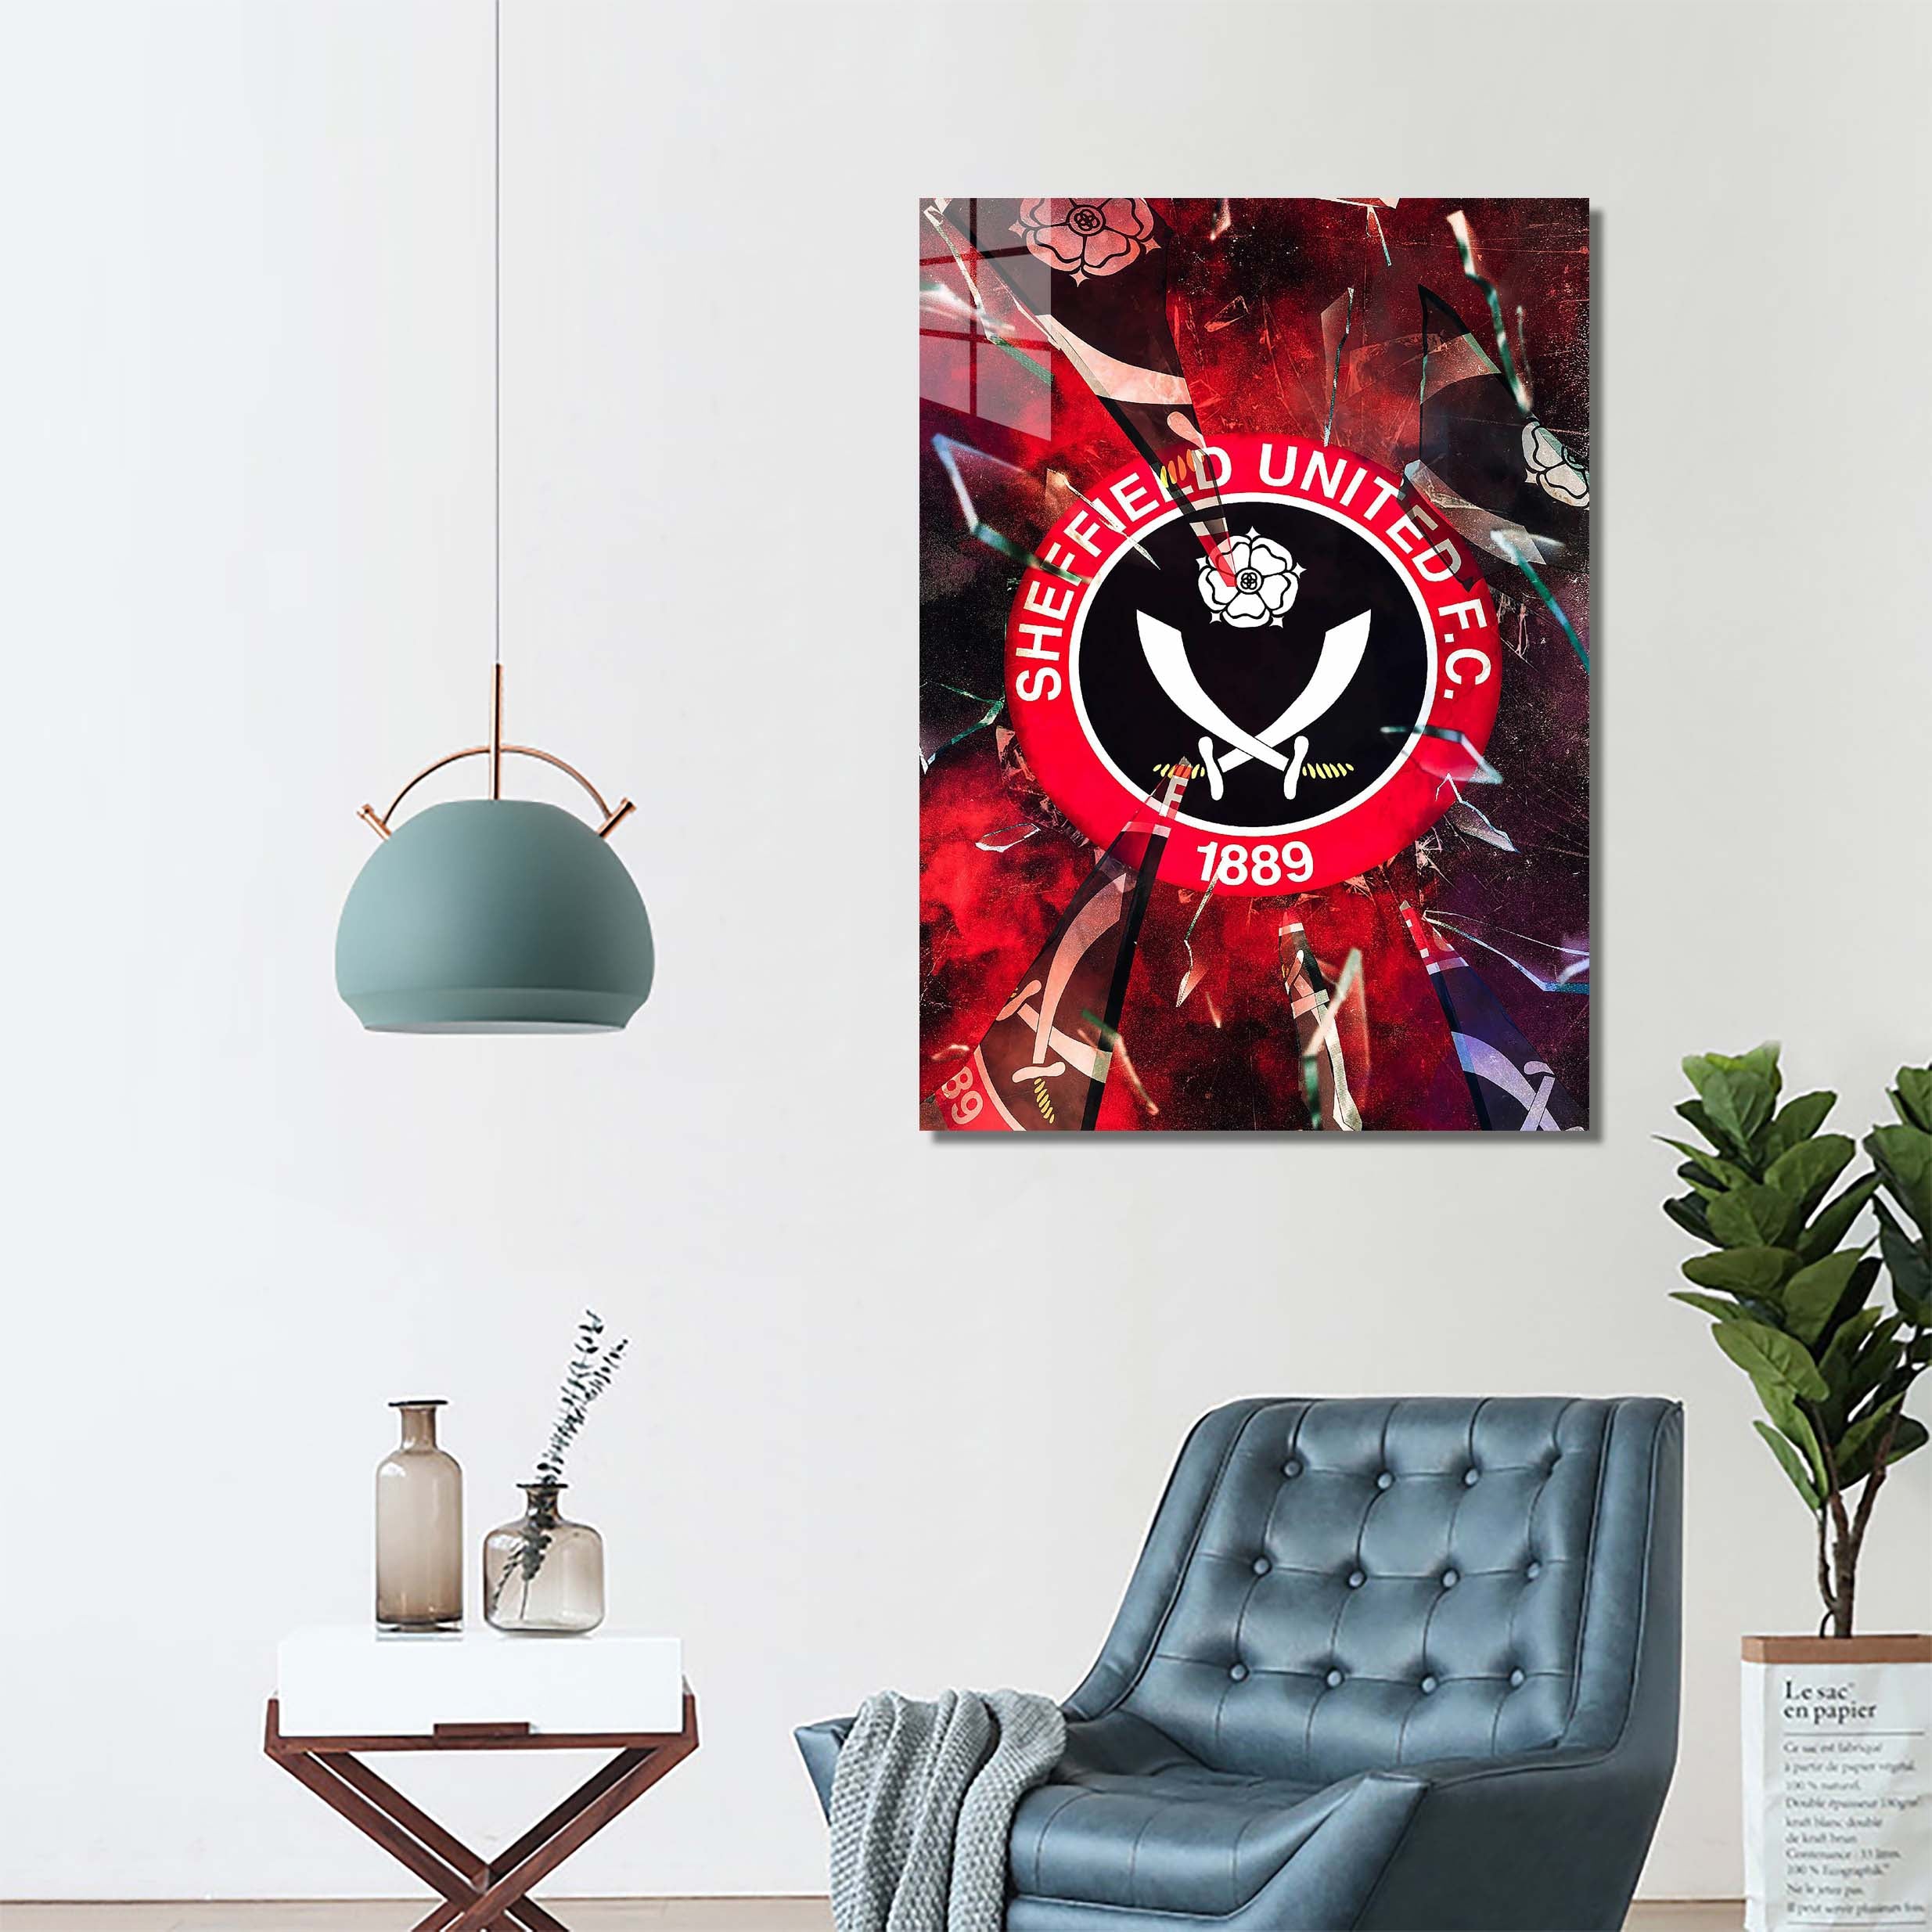 Sheffield United-designed by @Hoang Van Thuan